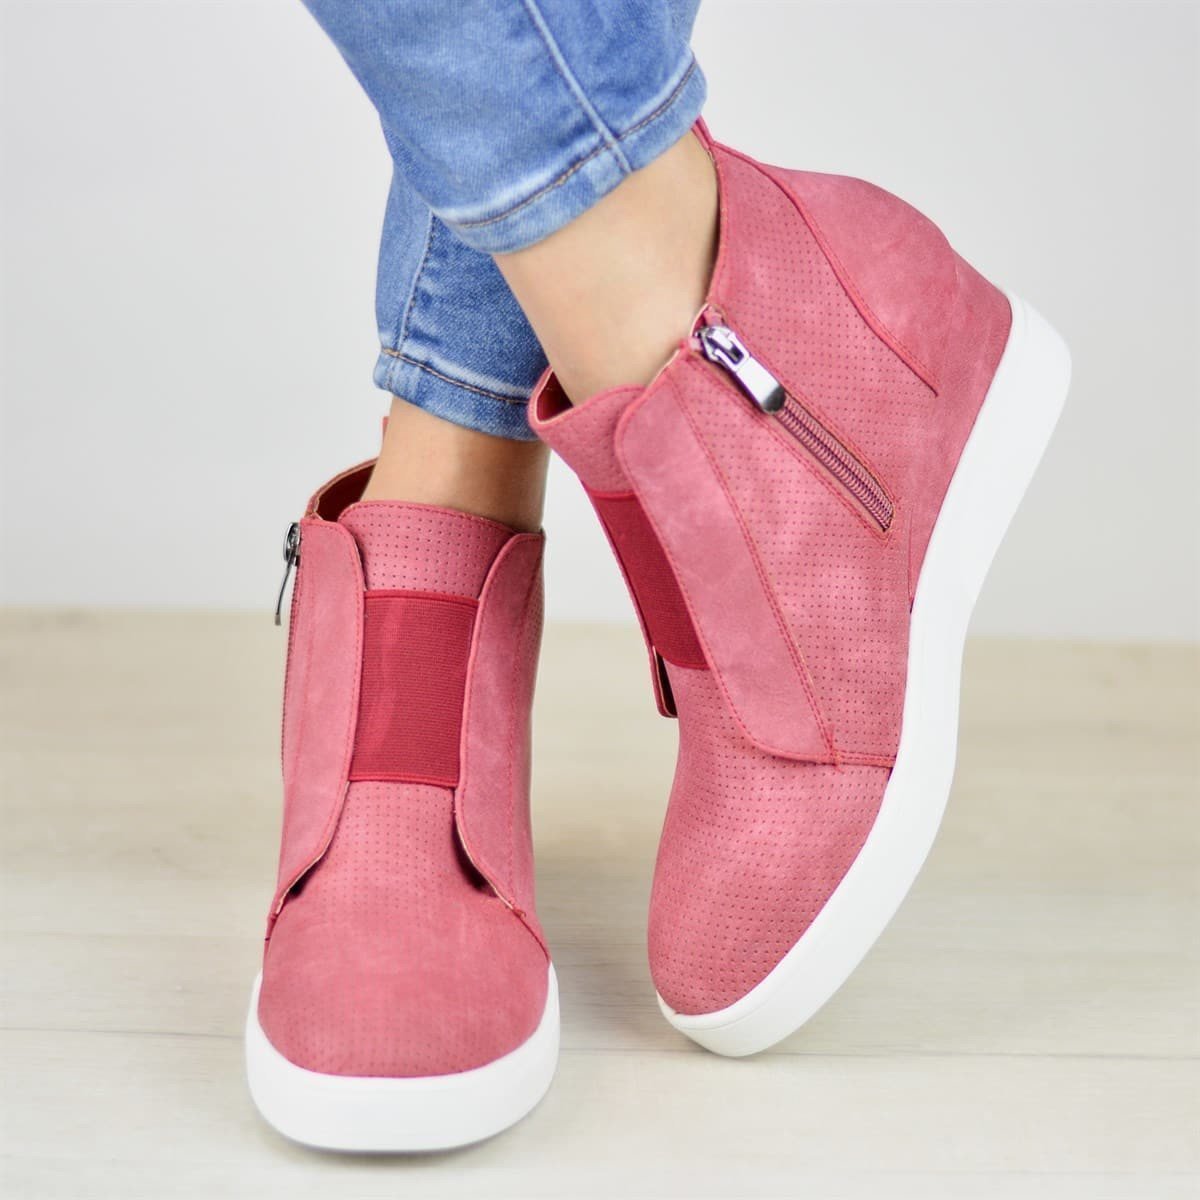 *Comfort Zipper Wedge Sneakers Plus Size Wedges with Side Zipper**